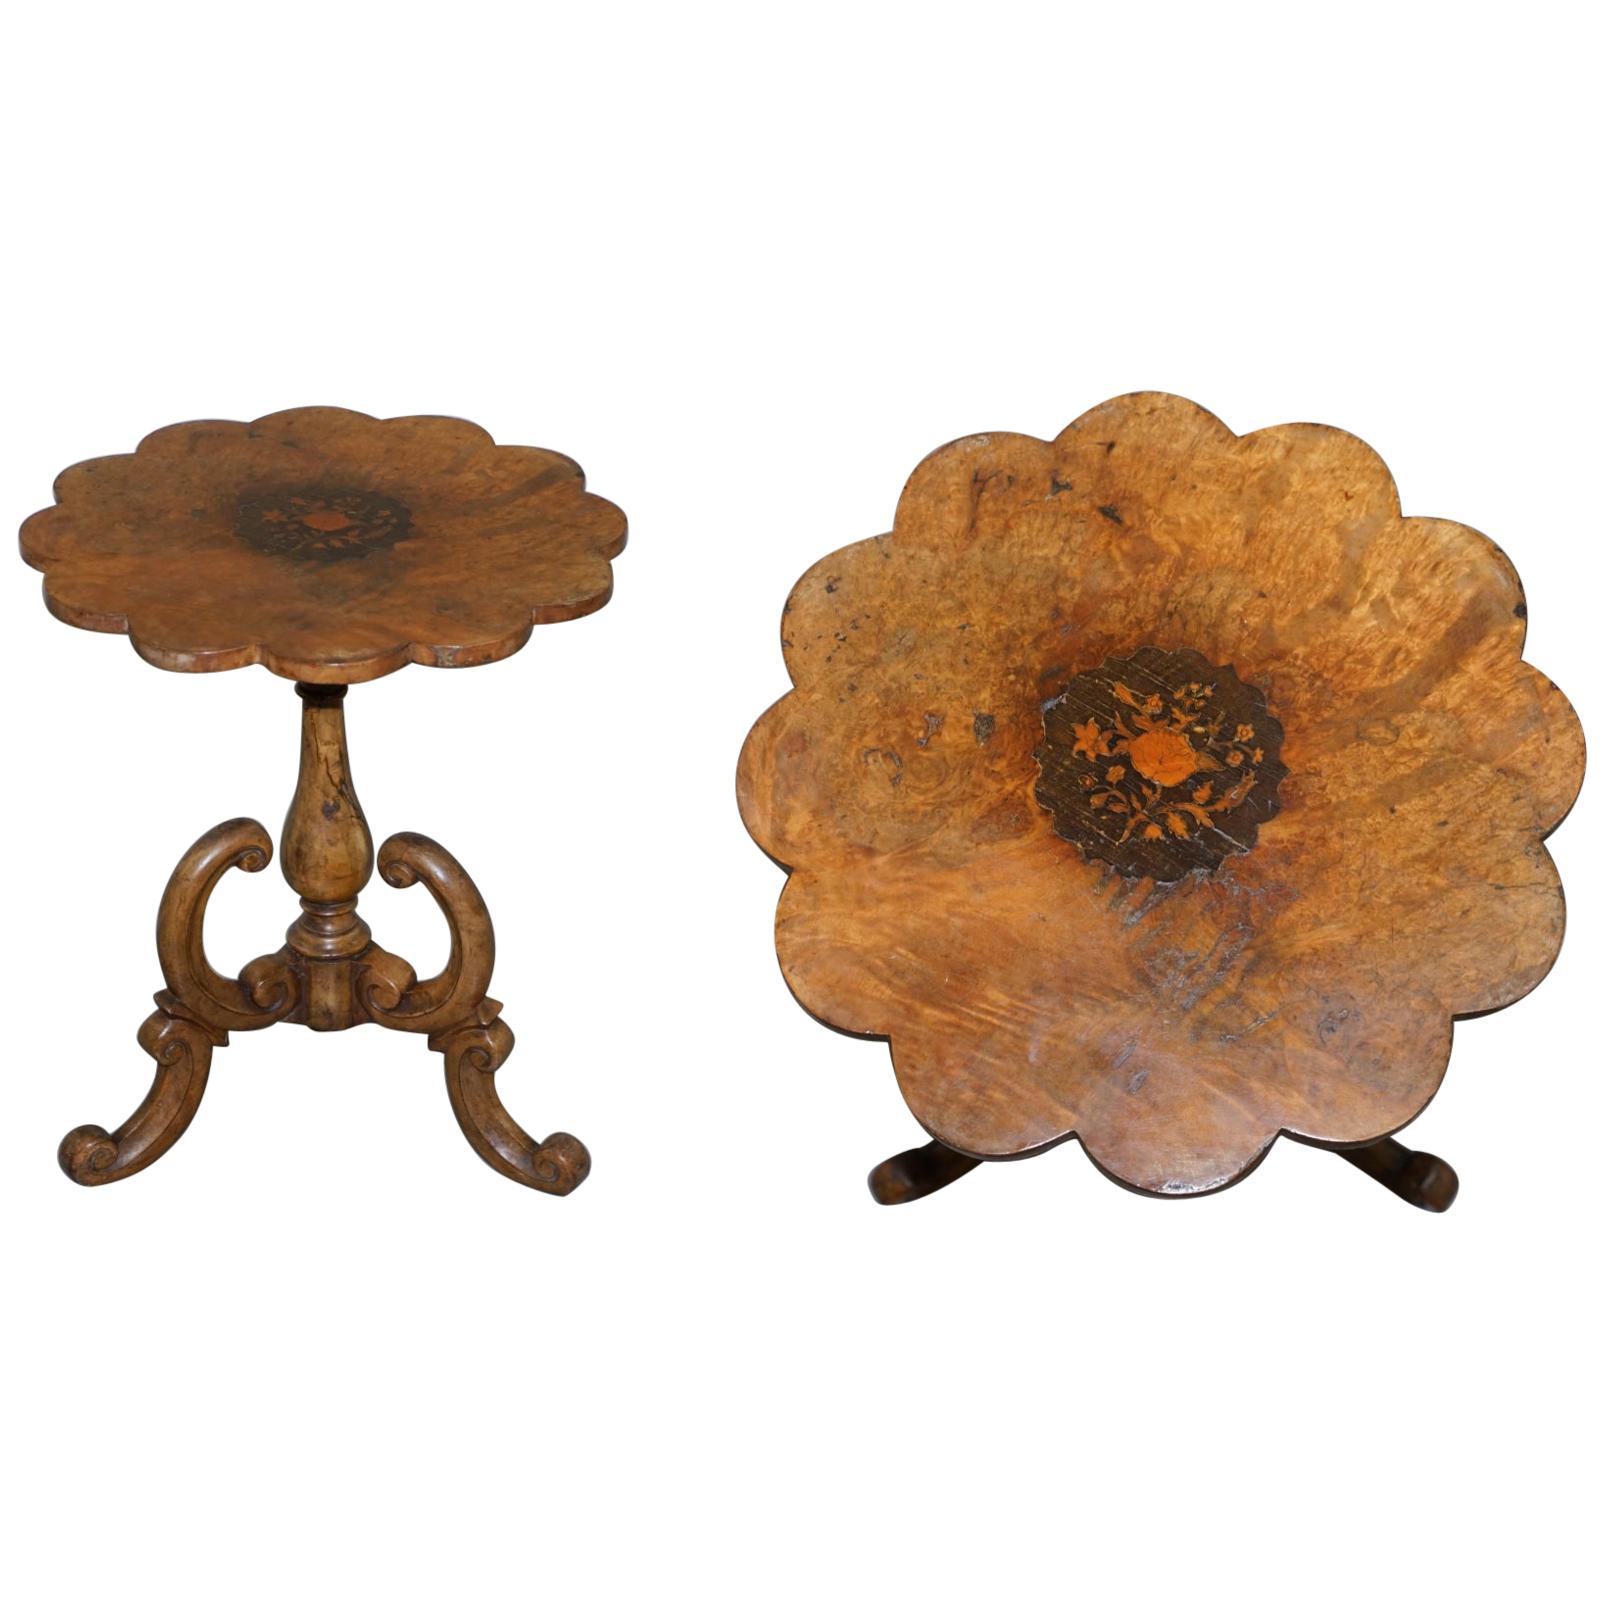 Victorian Burr Walnut Flower Tripod Side Table Victorian Ornate Carving Inlaid